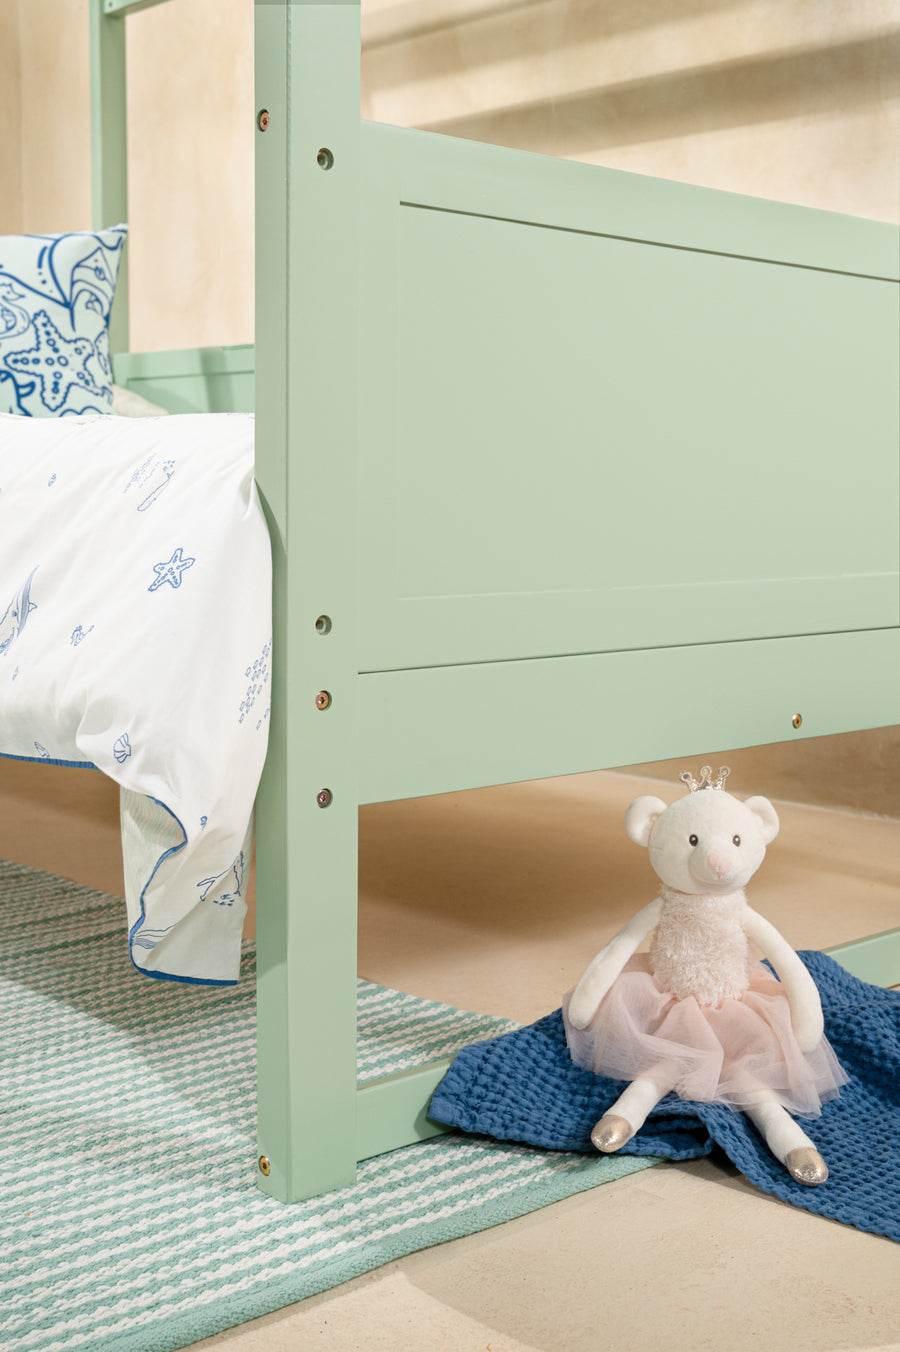 House bed with rails - Seafoam